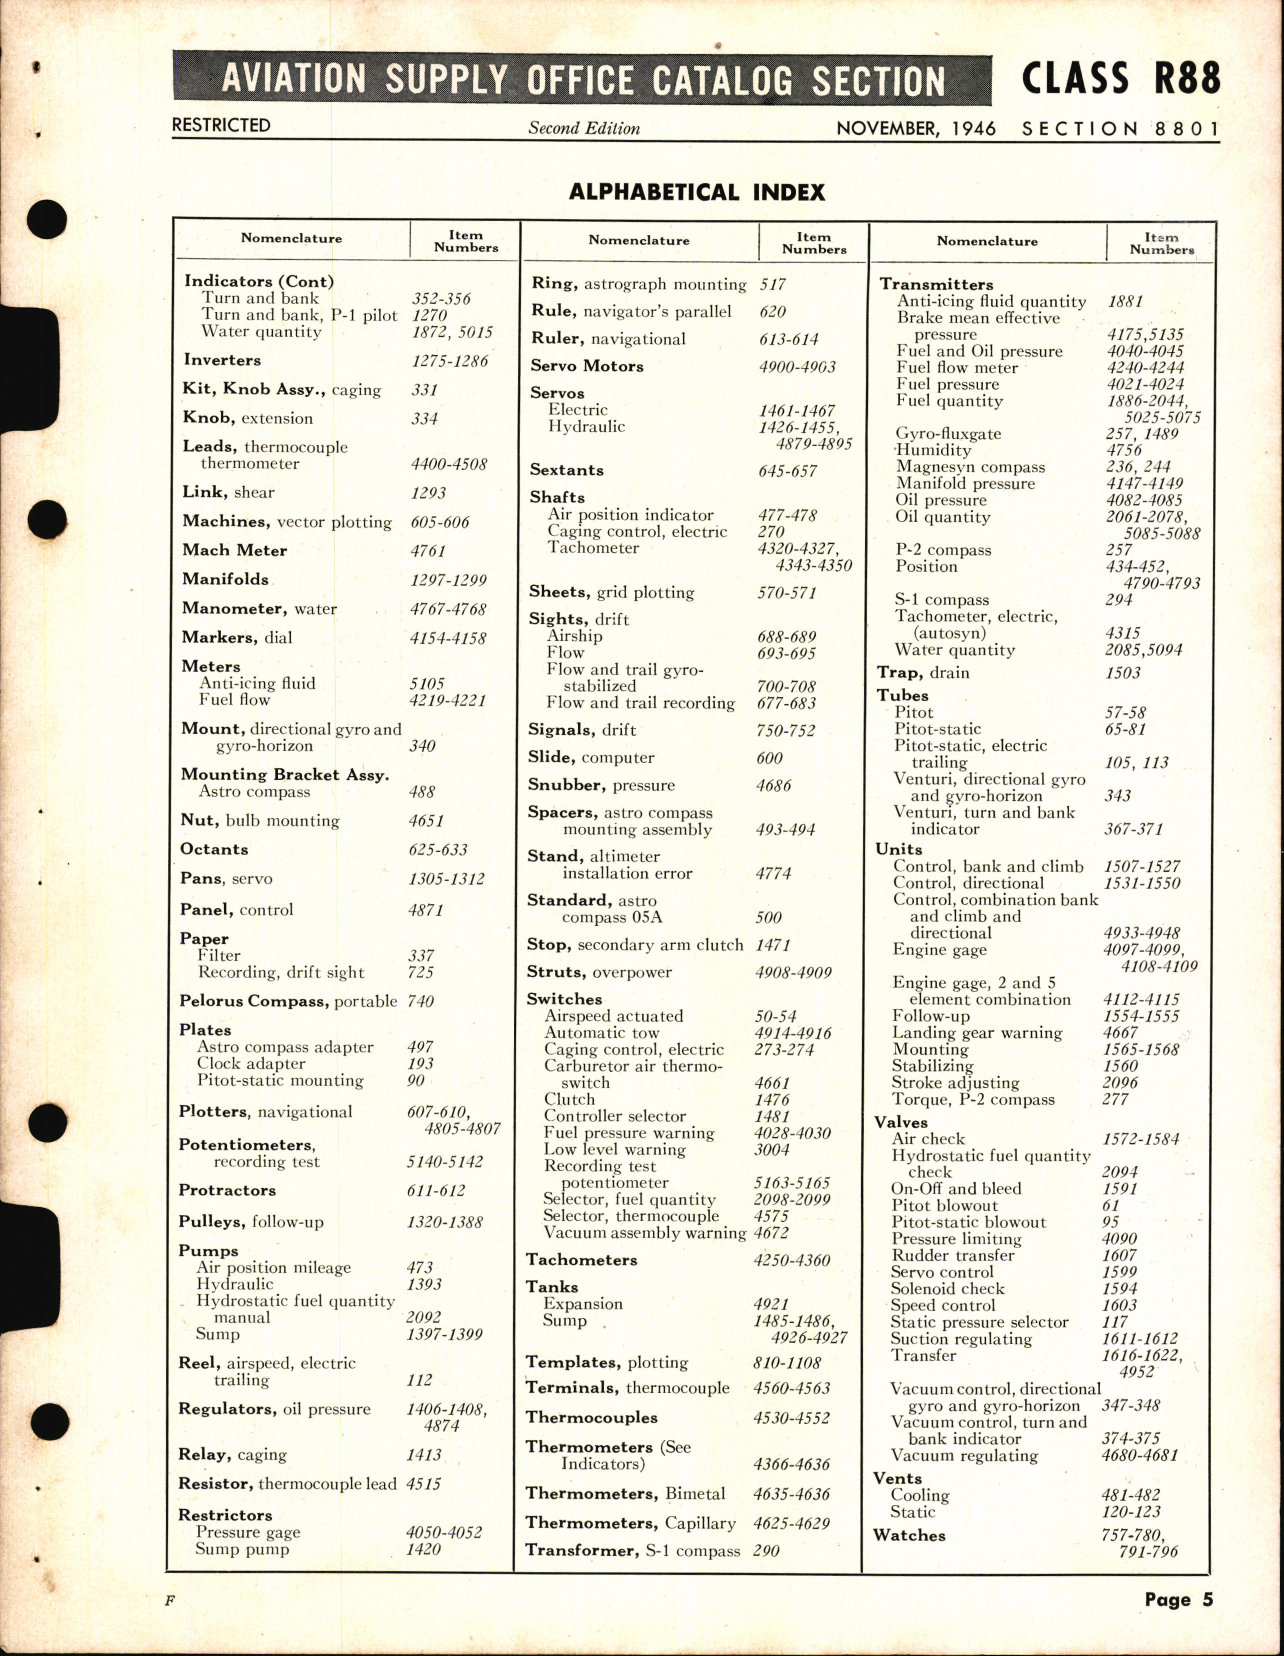 Sample page 5 from AirCorps Library document: Aeronautical Instruments 